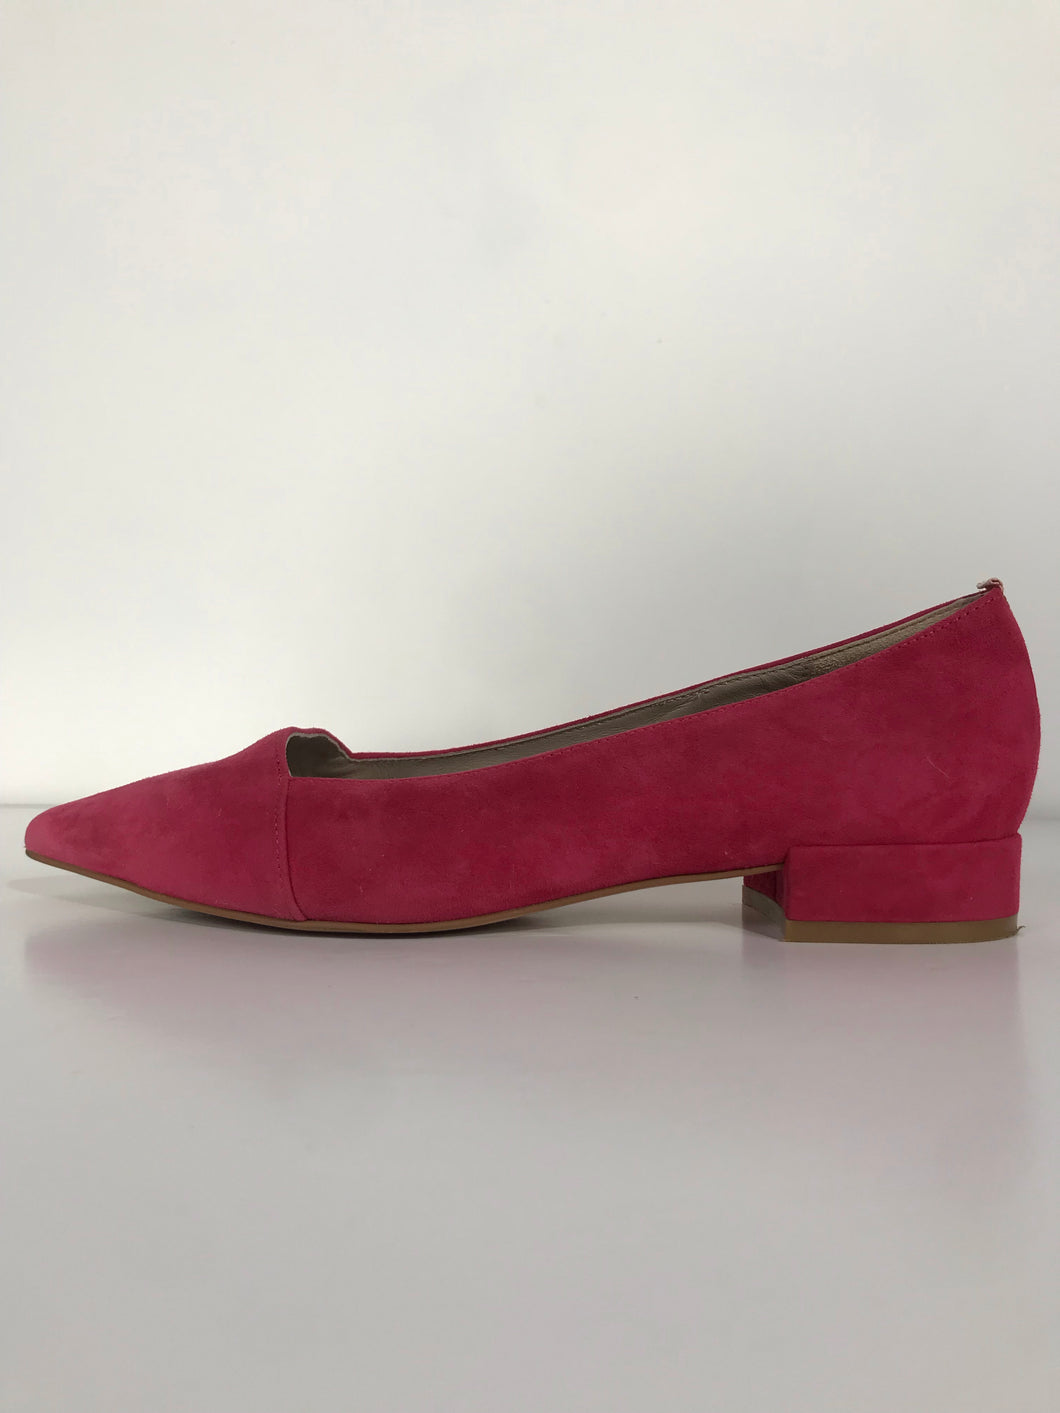 Boden Women's Suede Slip On Pumps Shoes | UK5 | Pink